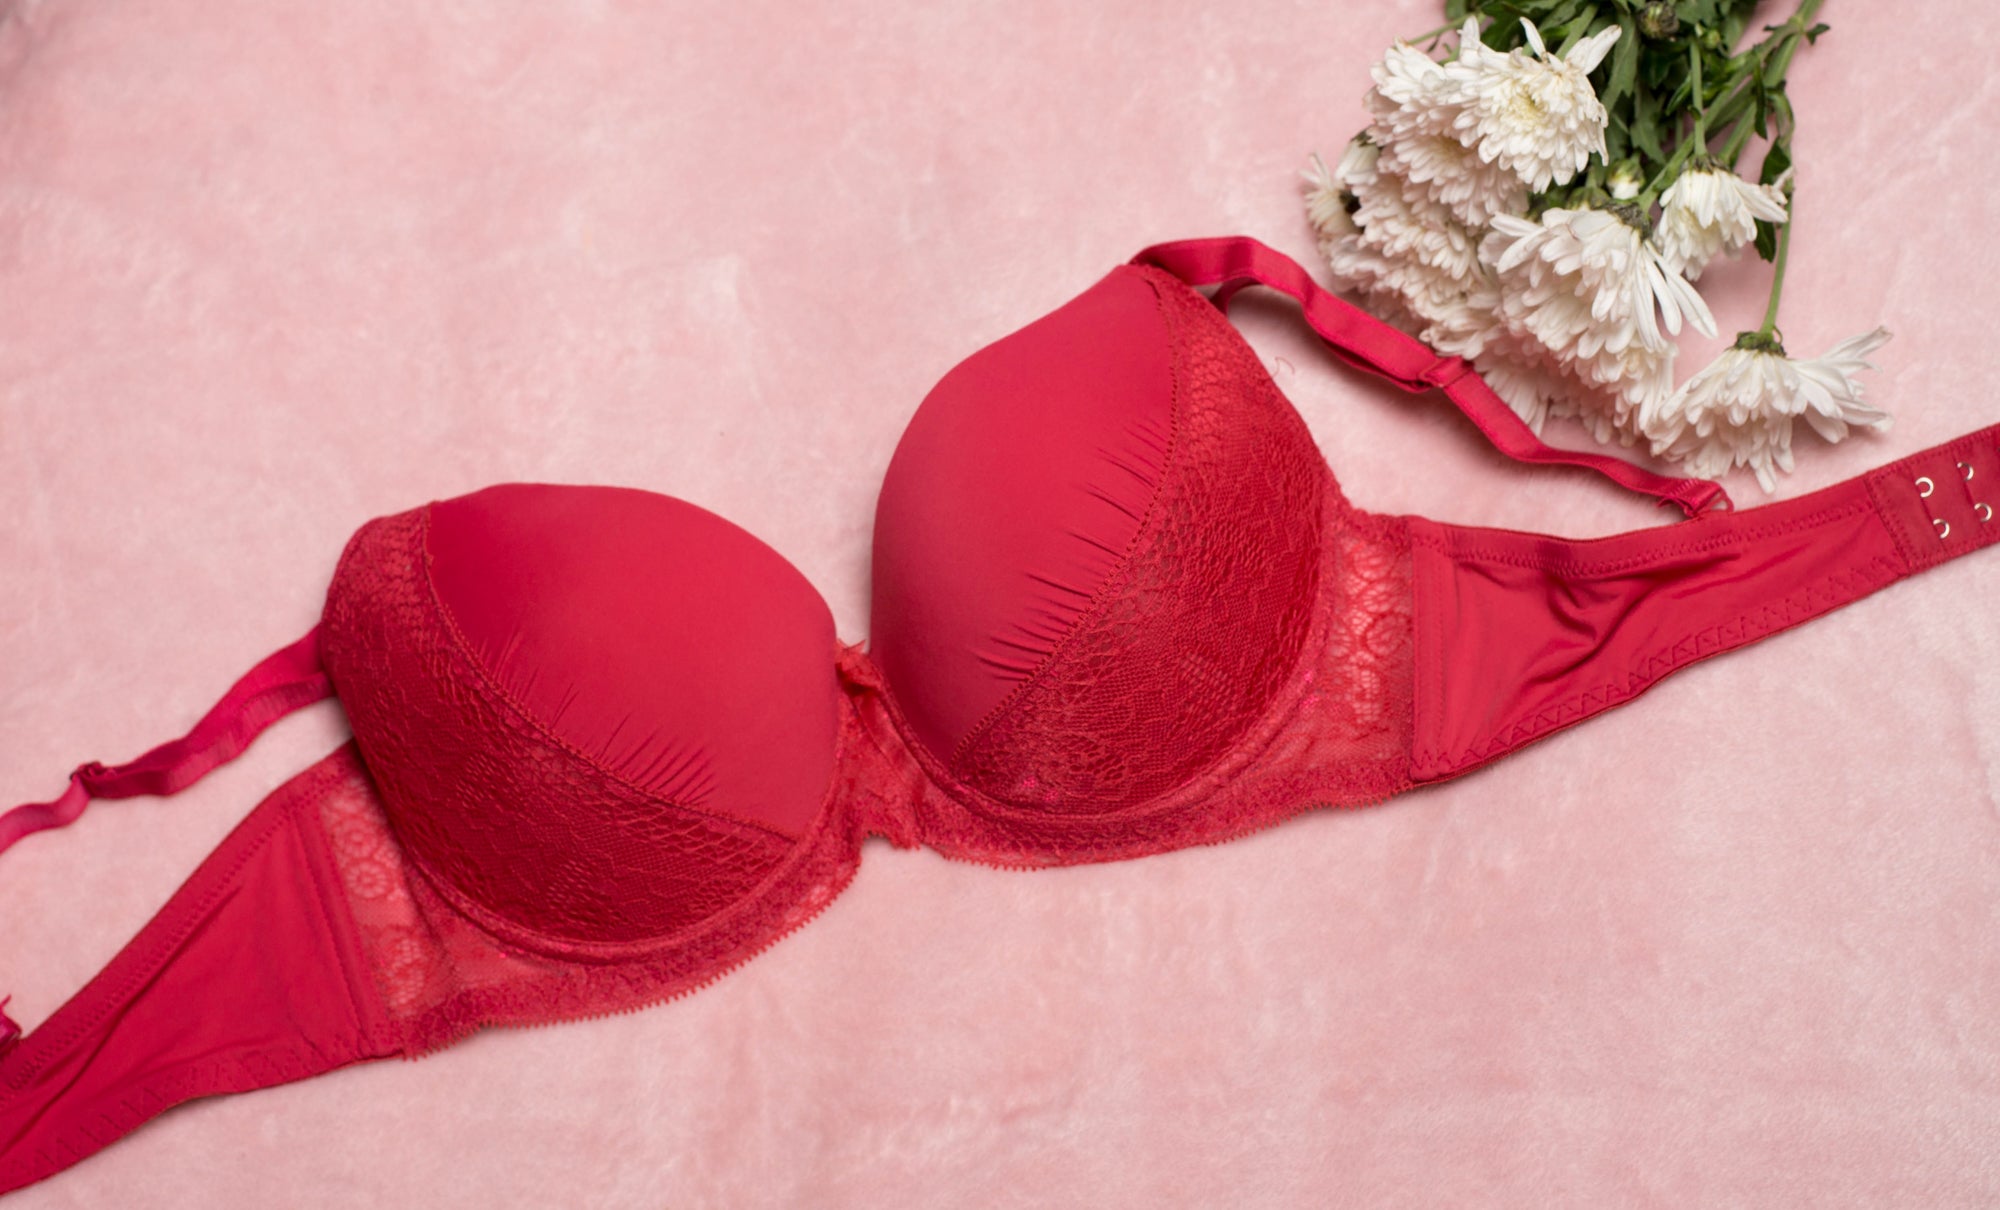 Traditional Non-Padded Bra 2 Pack